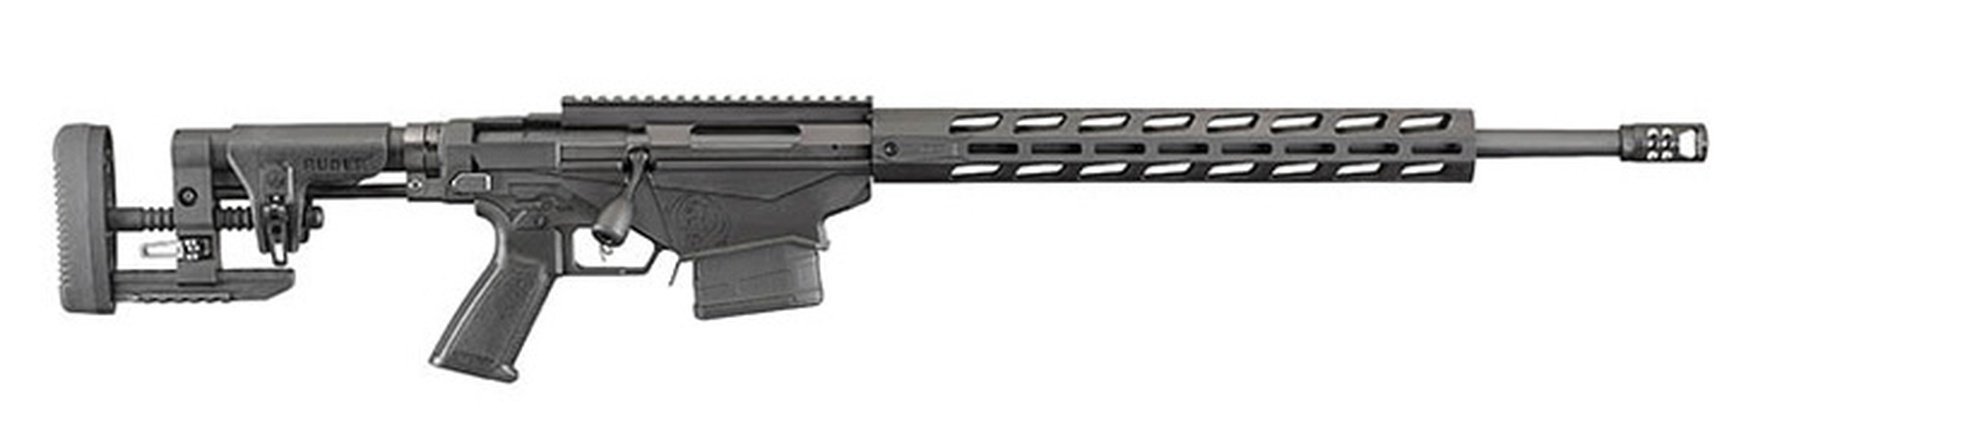 Don shot - Ruger Precision Rifle, 20", 308 Winchester